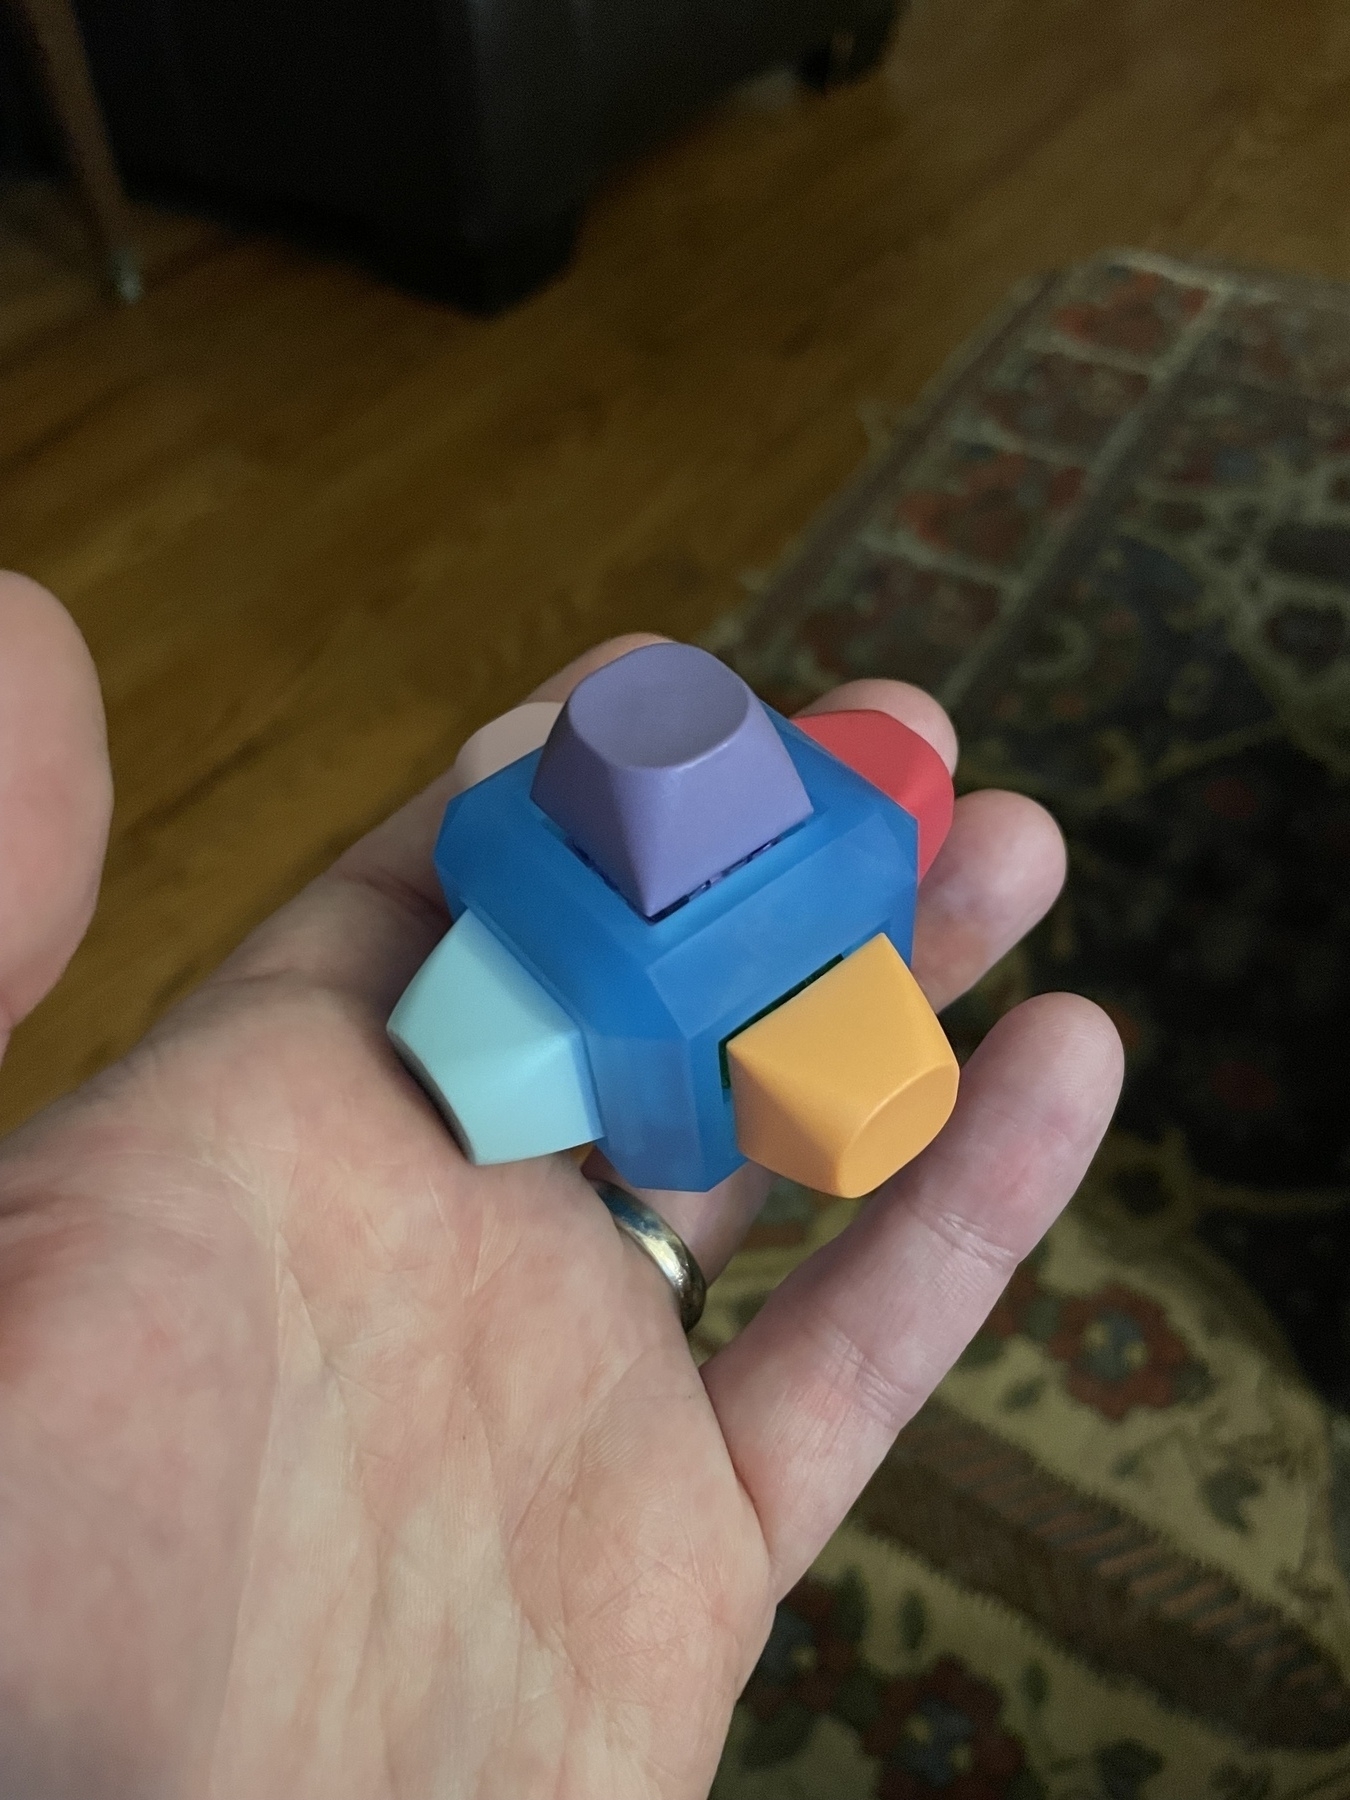 Evan’s left hand holding a cube with a keyboard key on each side.